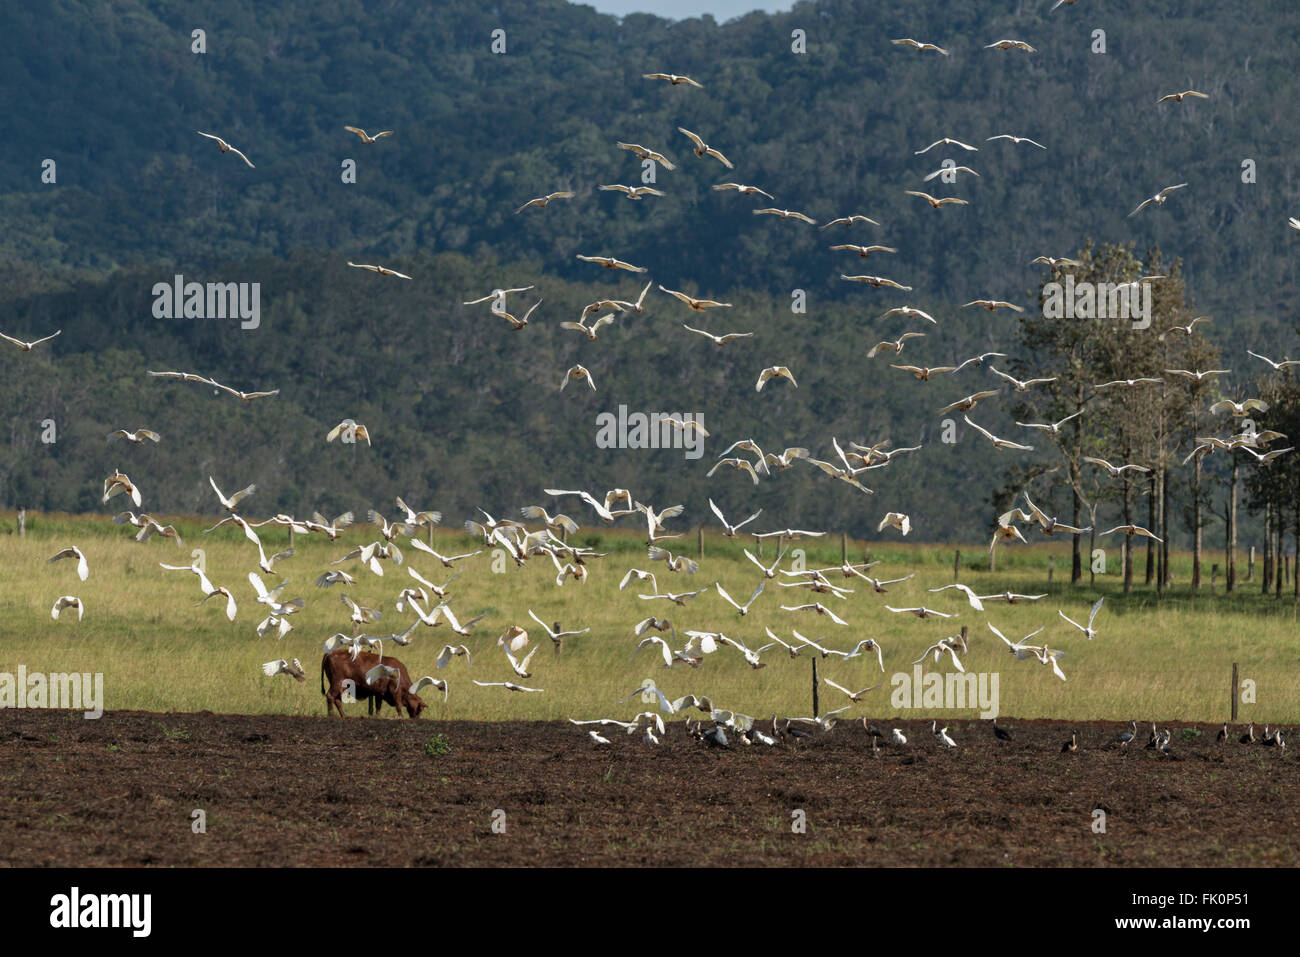 Huge flock of Sulphur-crested Cockatoo eating / digging peanuts from the newly ploughed fields with a cow in the field. The Sulp Stock Photo